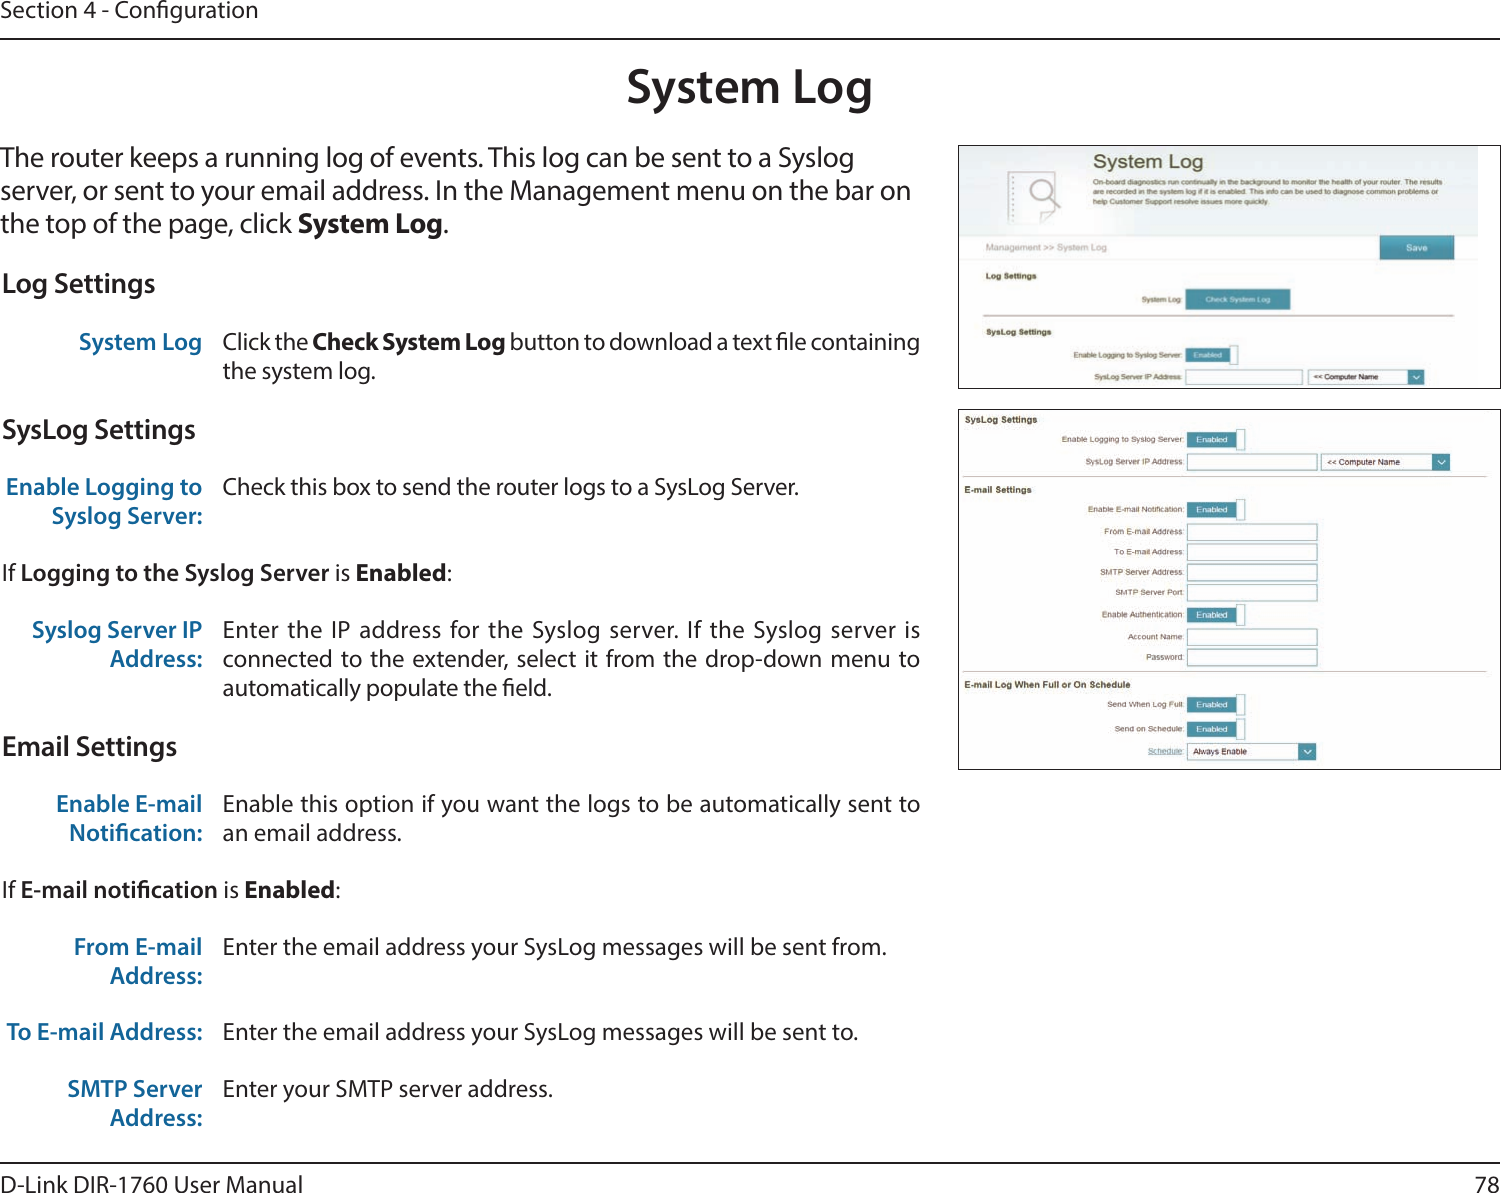 78D-Link DIR-1760 User ManualSection 4 - CongurationSystem LogThe router keeps a running log of events. This log can be sent to a Syslog server, or sent to your email address. In the Management menu on the bar on the top of the page, click System Log. Log SettingsSystem Log Click the Check System Log button to download a text le containing the system log.SysLog SettingsEnable Logging to Syslog Server:Check this box to send the router logs to a SysLog Server. If Logging to the Syslog Server is Enabled:Syslog Server IP Address:Enter the IP address for the Syslog server. If the Syslog server is connected to the extender, select it from the drop-down menu to automatically populate the eld. Email SettingsEnable E-mail Notication:Enable this option if you want the logs to be automatically sent to an email address.If E-mail notication is Enabled:From E-mail Address:Enter the email address your SysLog messages will be sent from.To E-mail Address: Enter the email address your SysLog messages will be sent to.SMTP Server Address:Enter your SMTP server address.